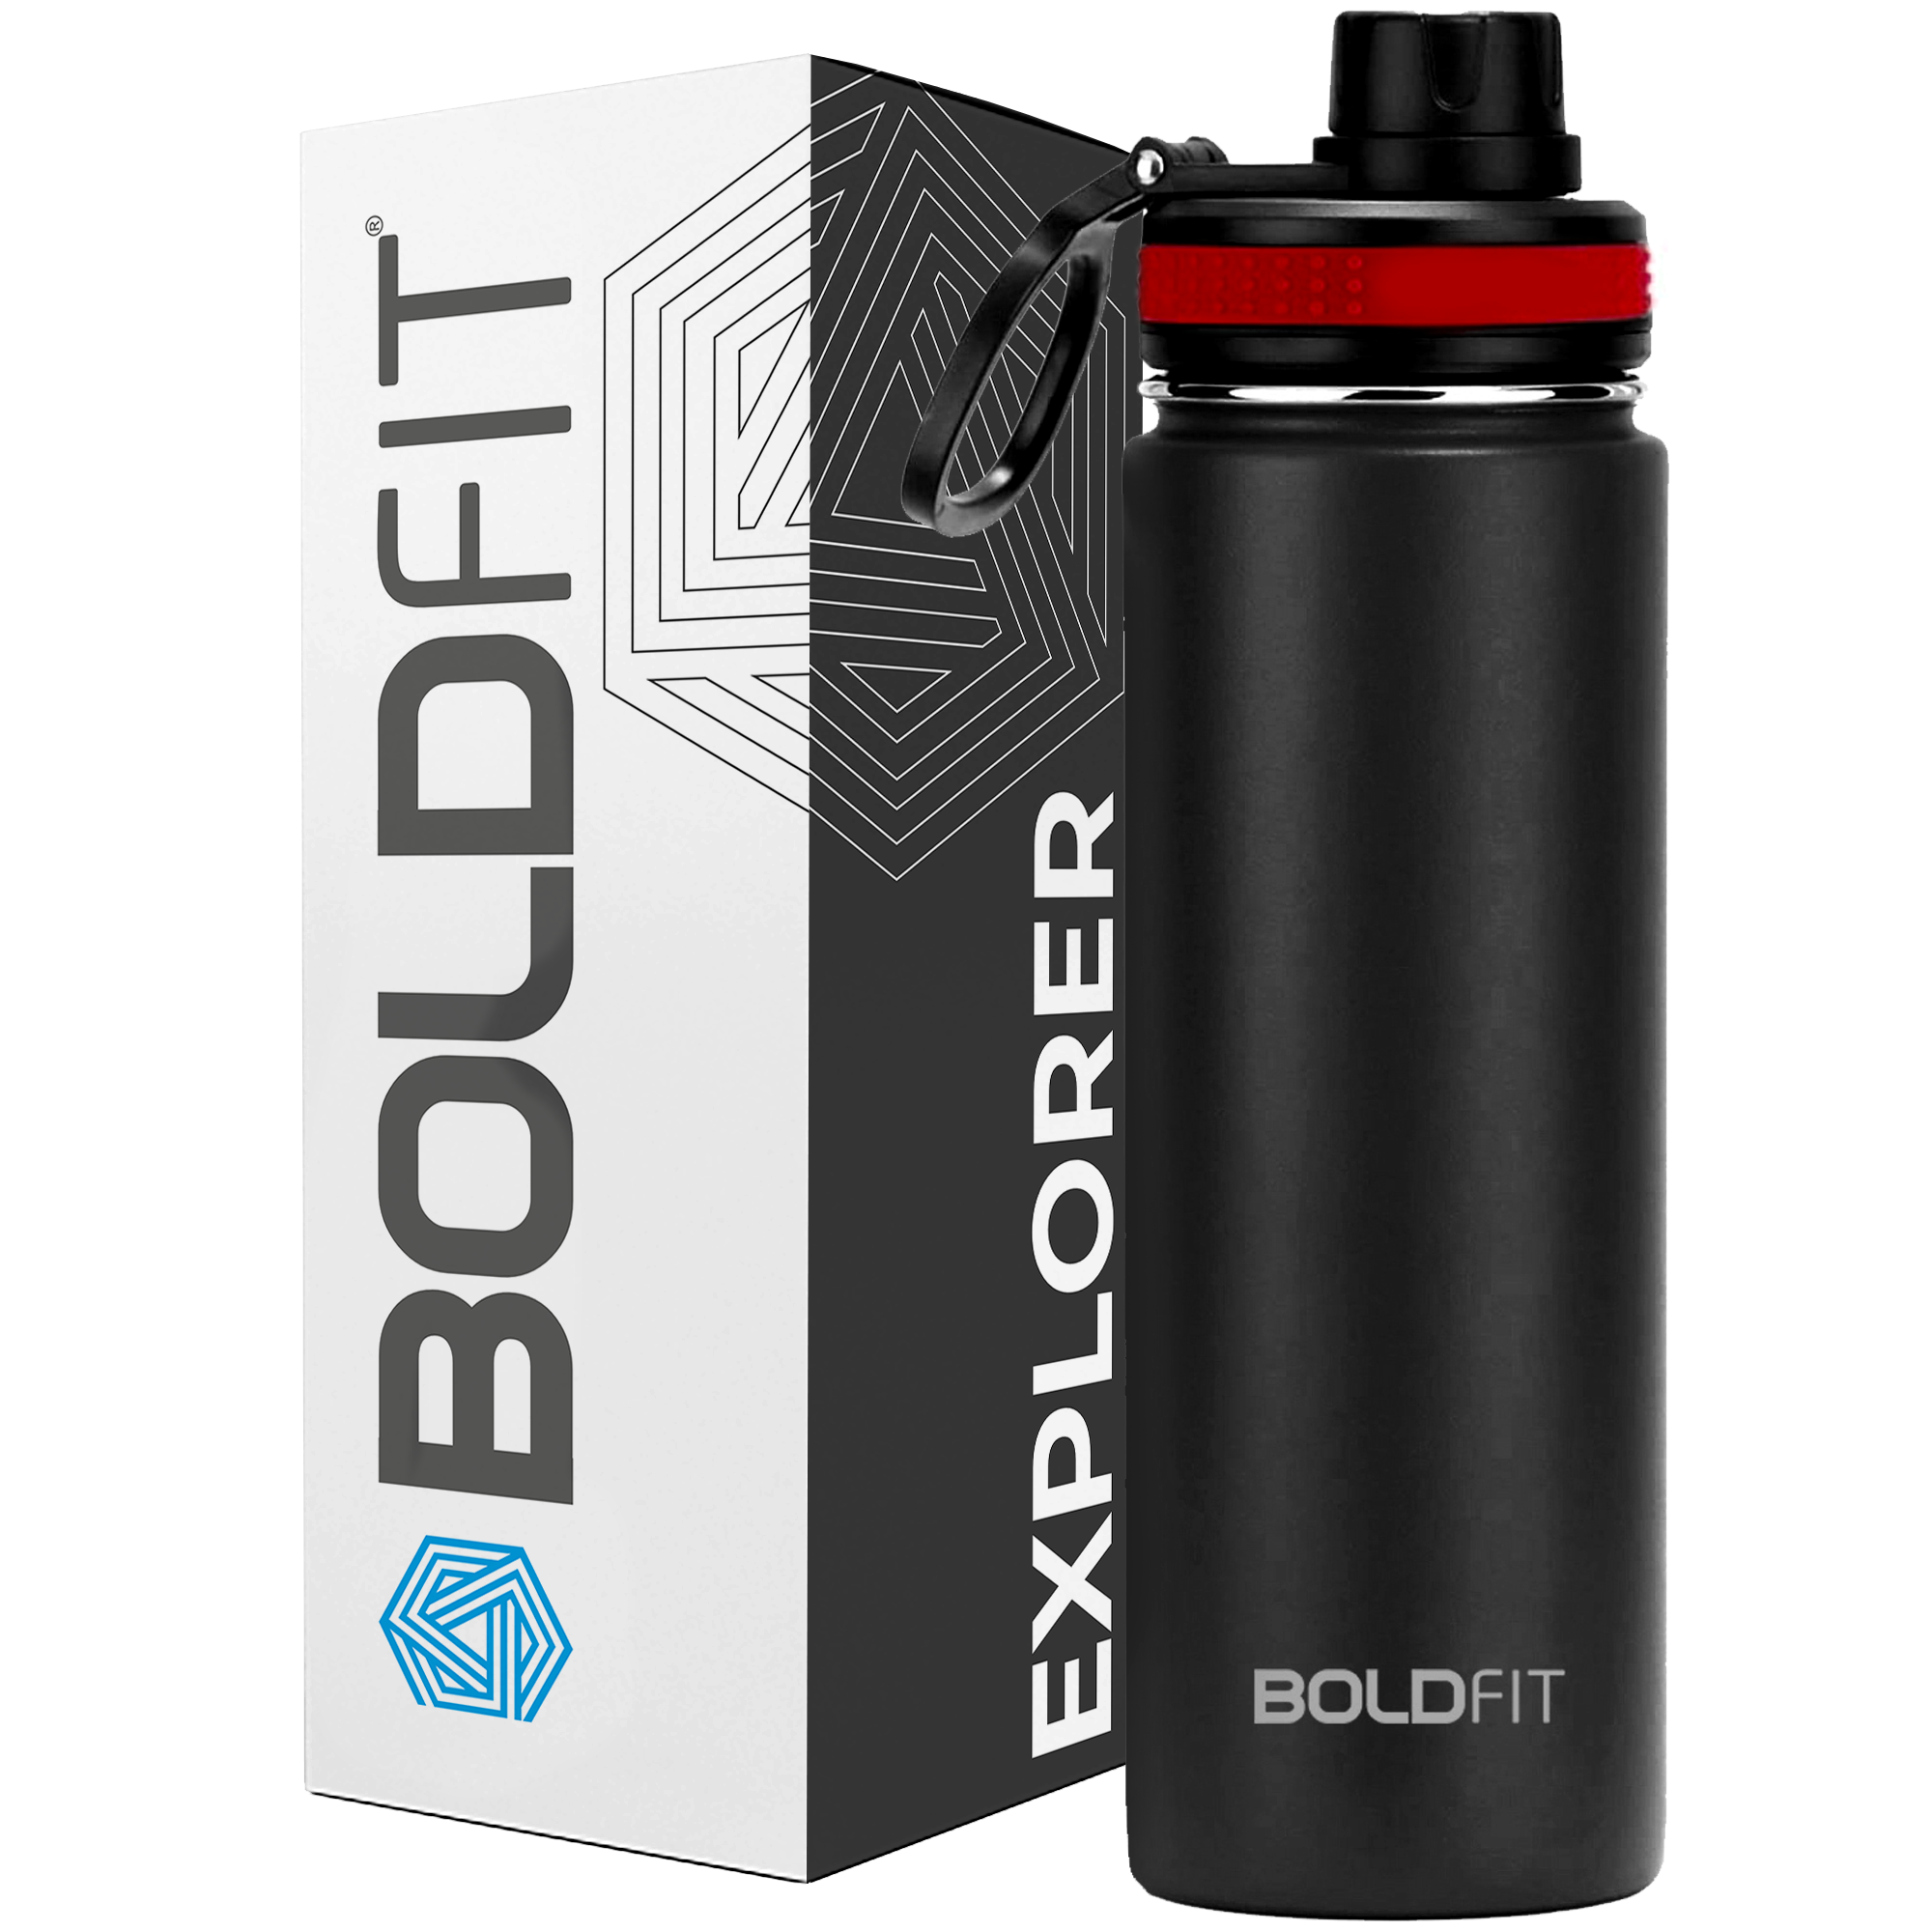 Stainless Steel Hot & Cold Water Bottle -700ml - BoldFit